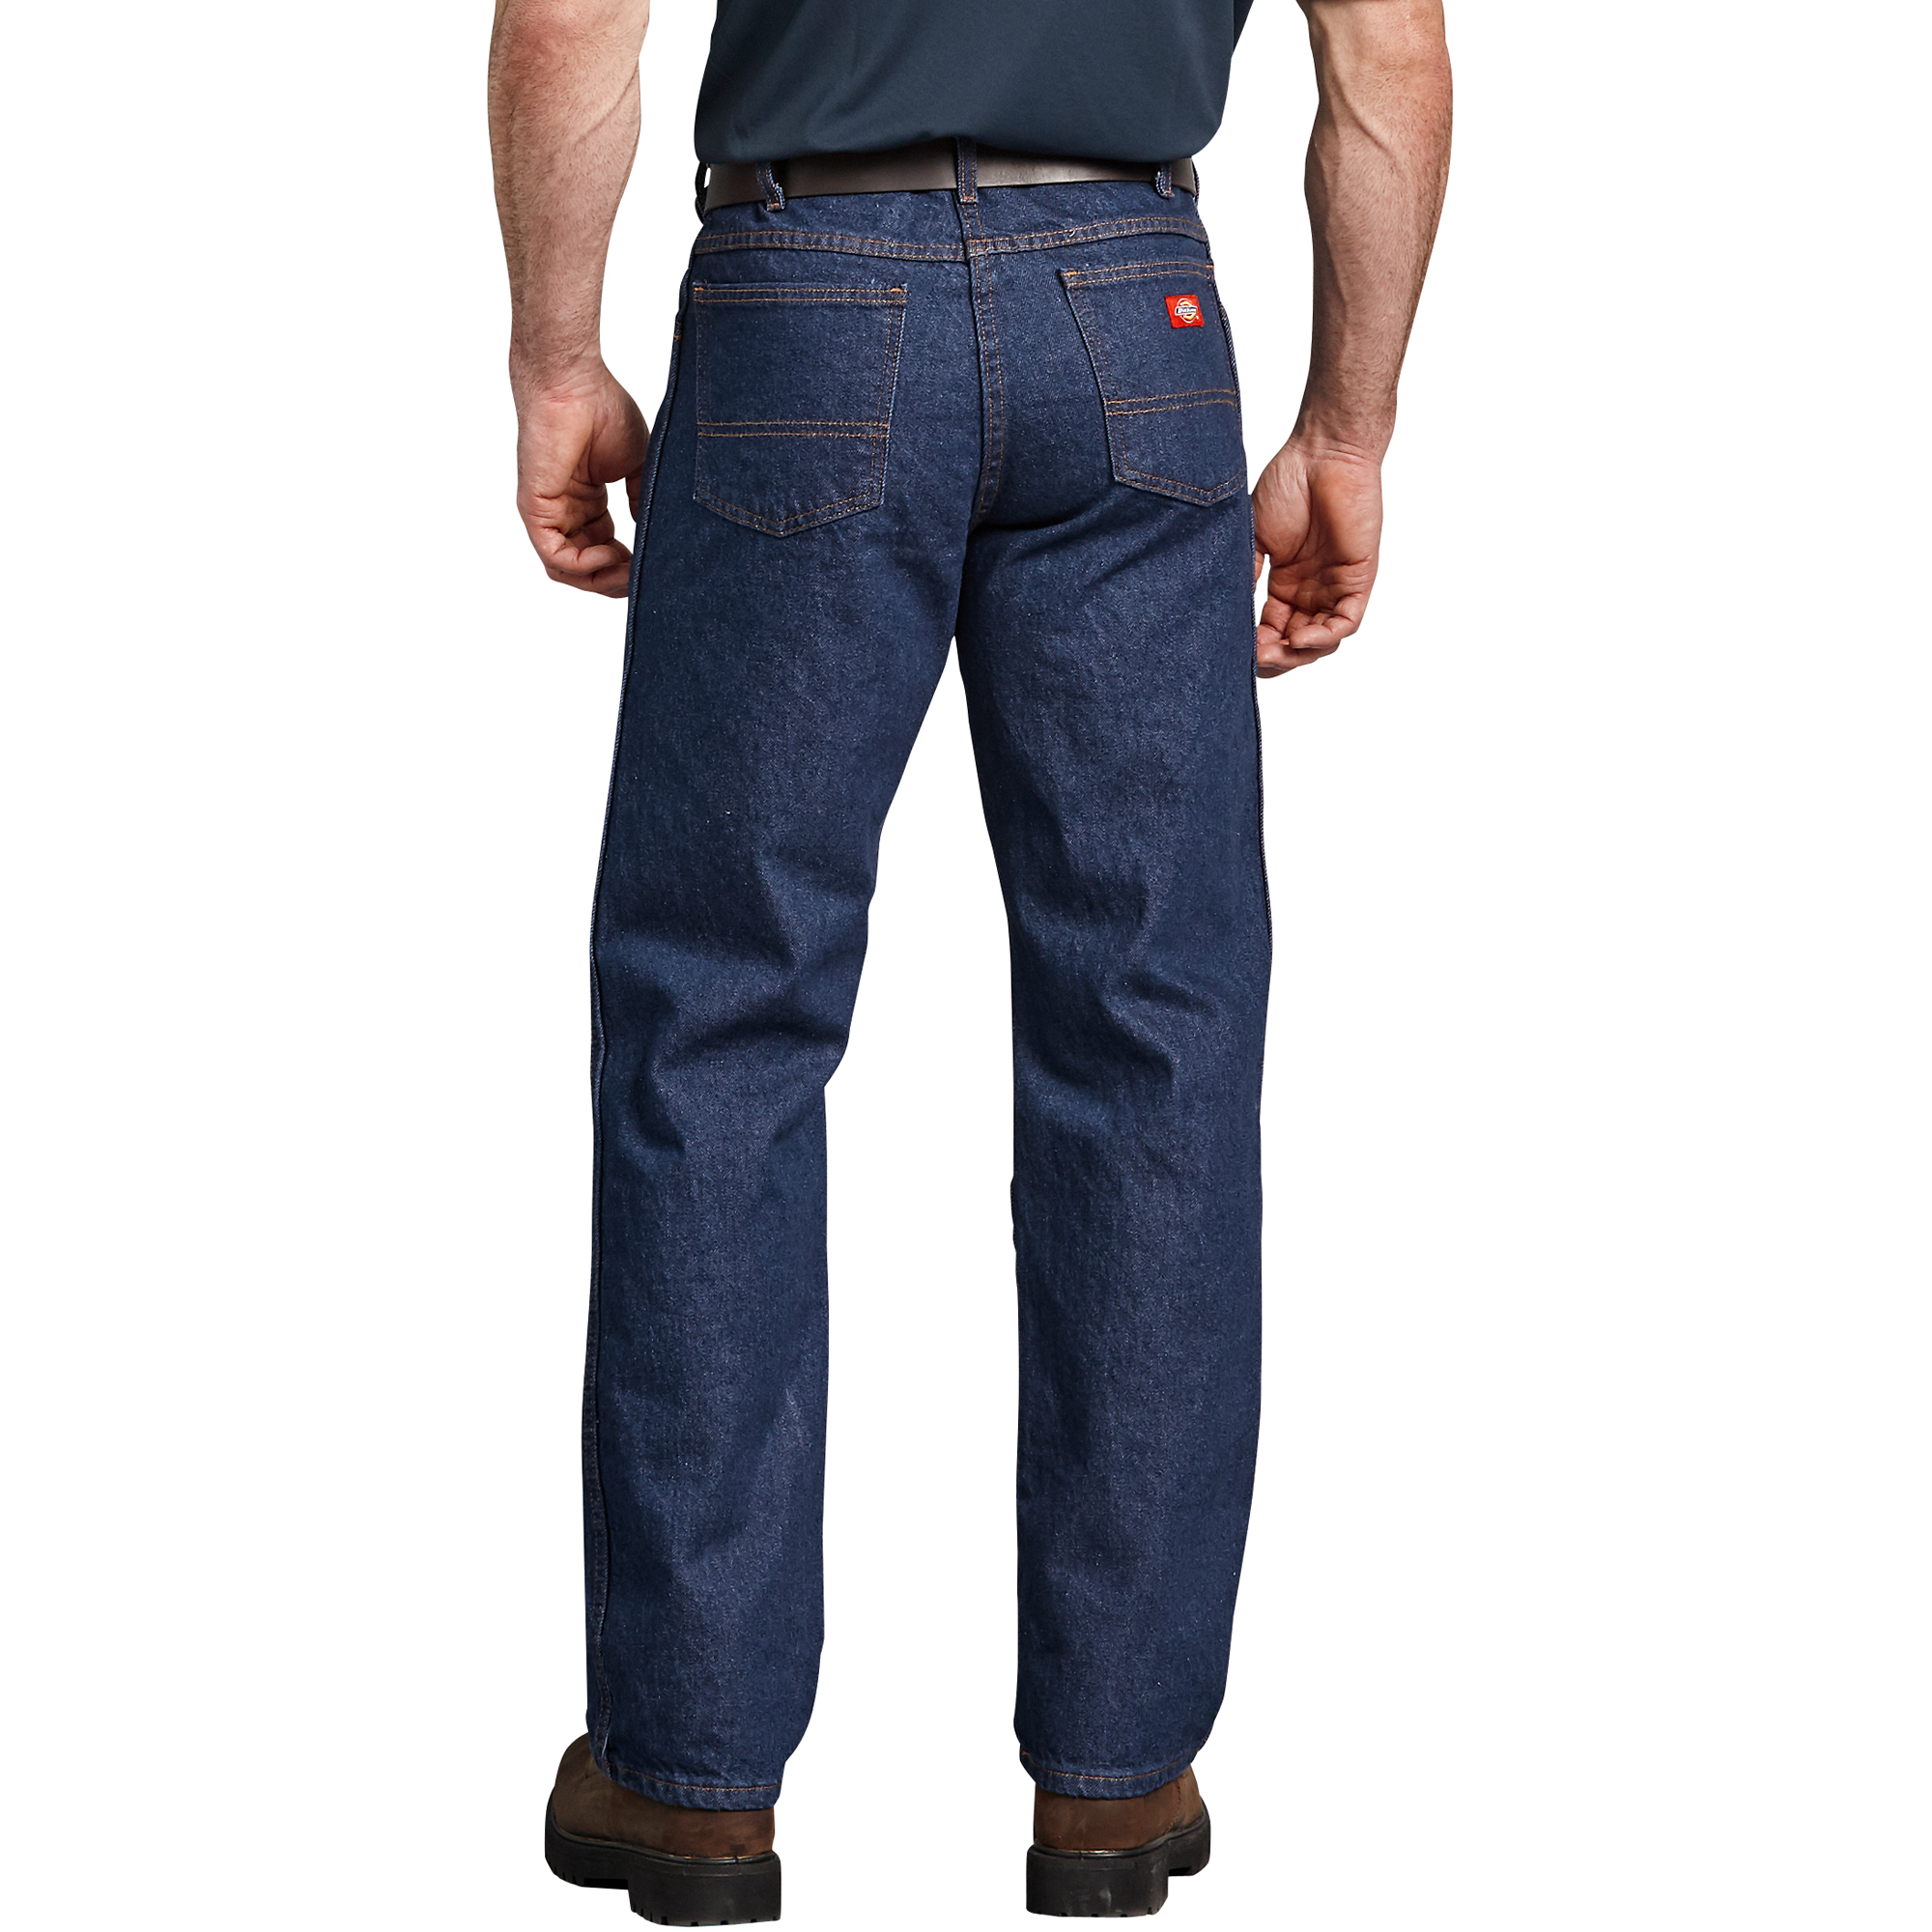 mønster Kyst Retfærdighed Dickies Industrial Regular Fit Jeans | Prudential Overall Supply